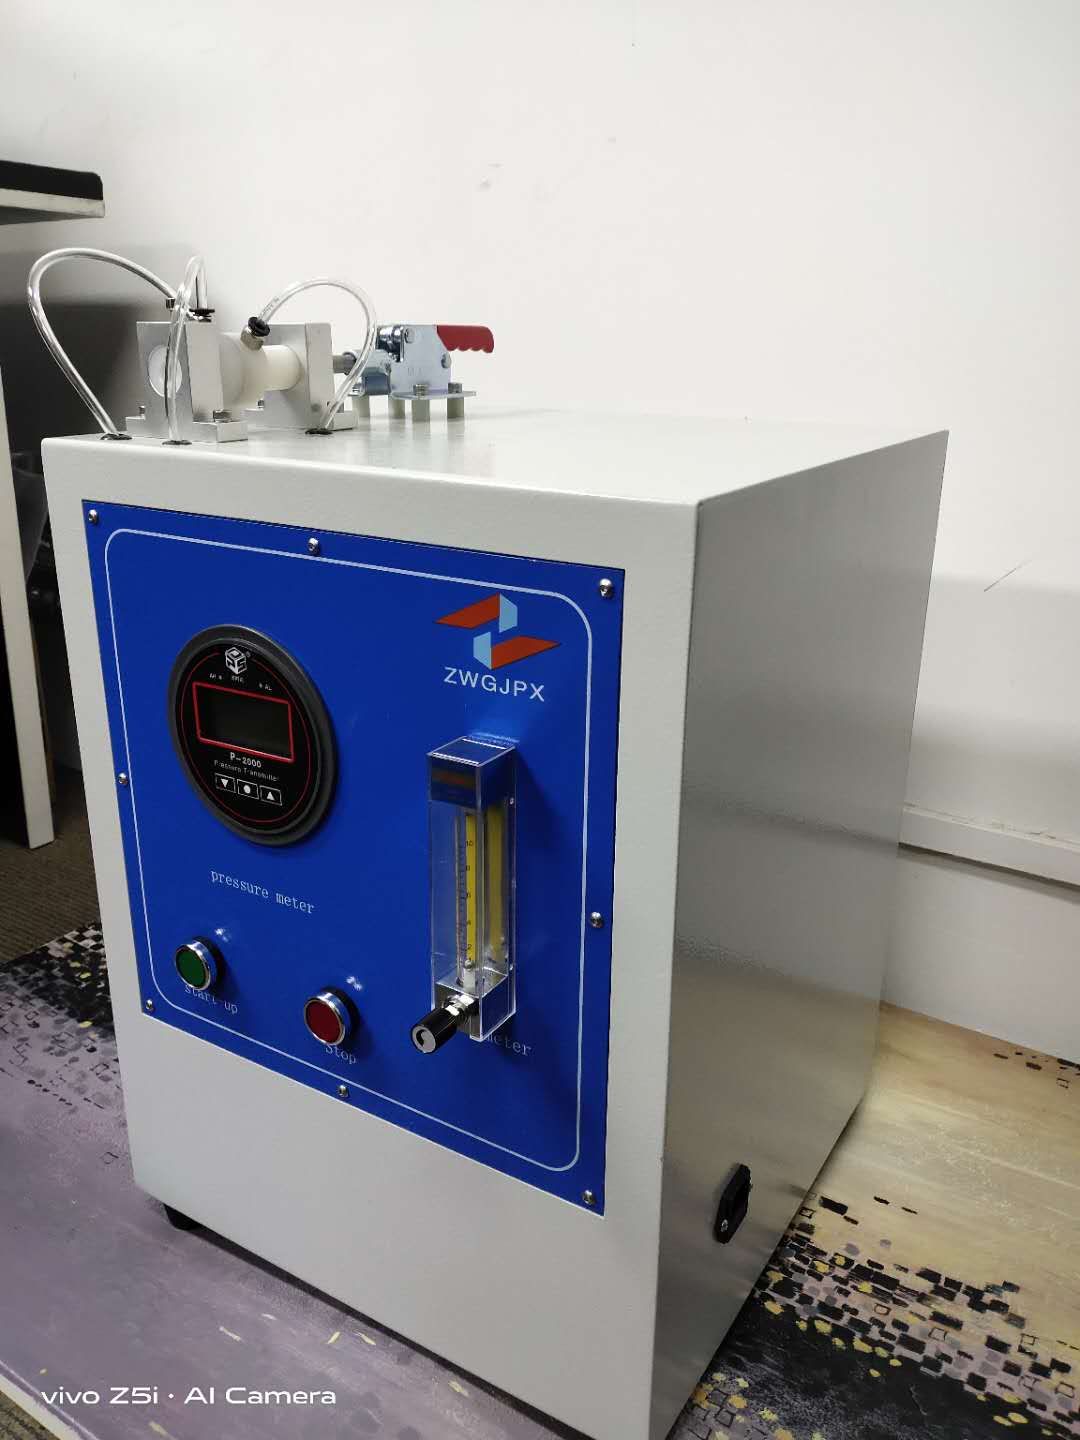 Pressure difference tester for gas exchange of respirator